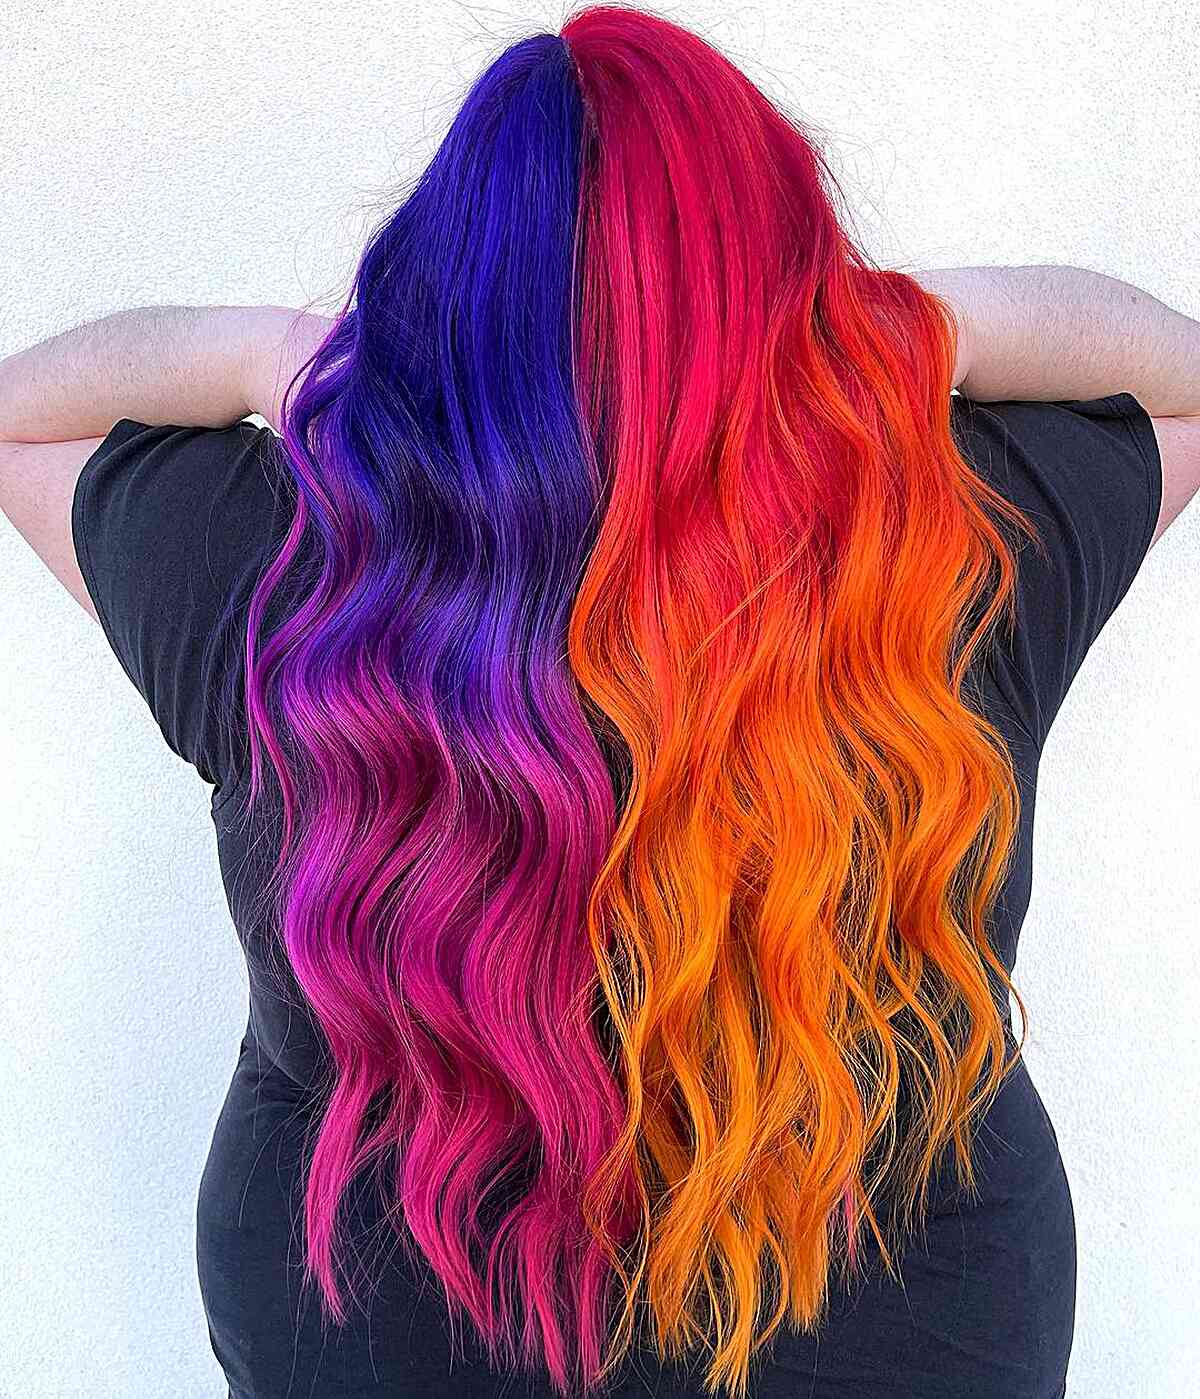 Double Sunset Split Dye with Blue, Red, Purple and Orange Tones